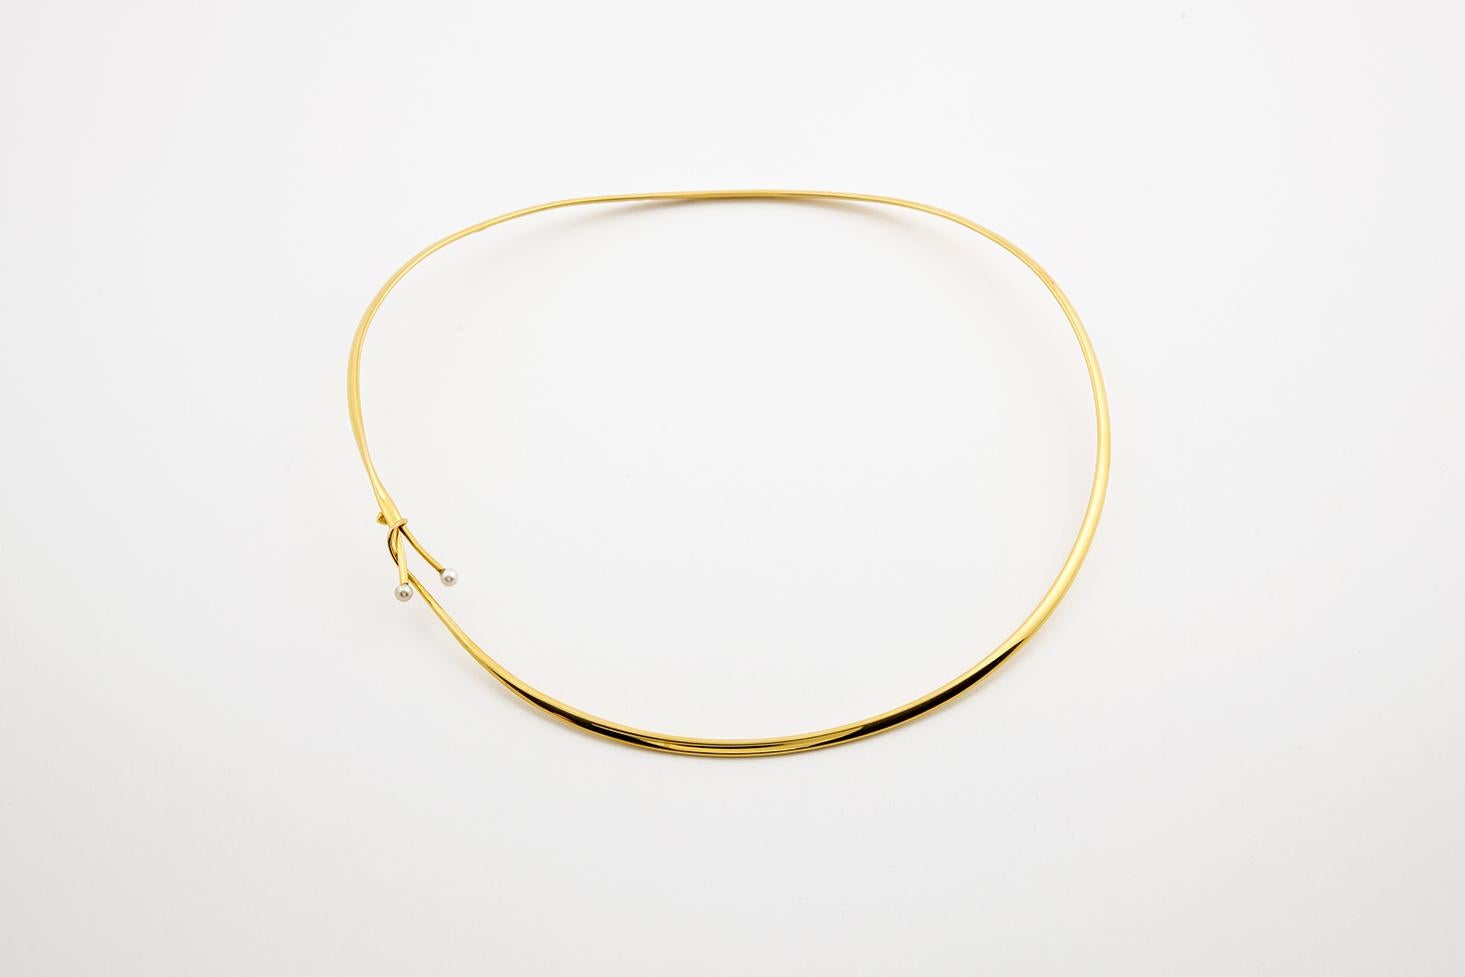 A very delicate and sensual neck ring designed  around 1970's by Vivianna Torun (1927-2004) , the most famous Swedish goldsmith. A 18ct neckring is referenced under #904 in the original 1972 Georg Jensen's catalog. It is designed as a delicate liana